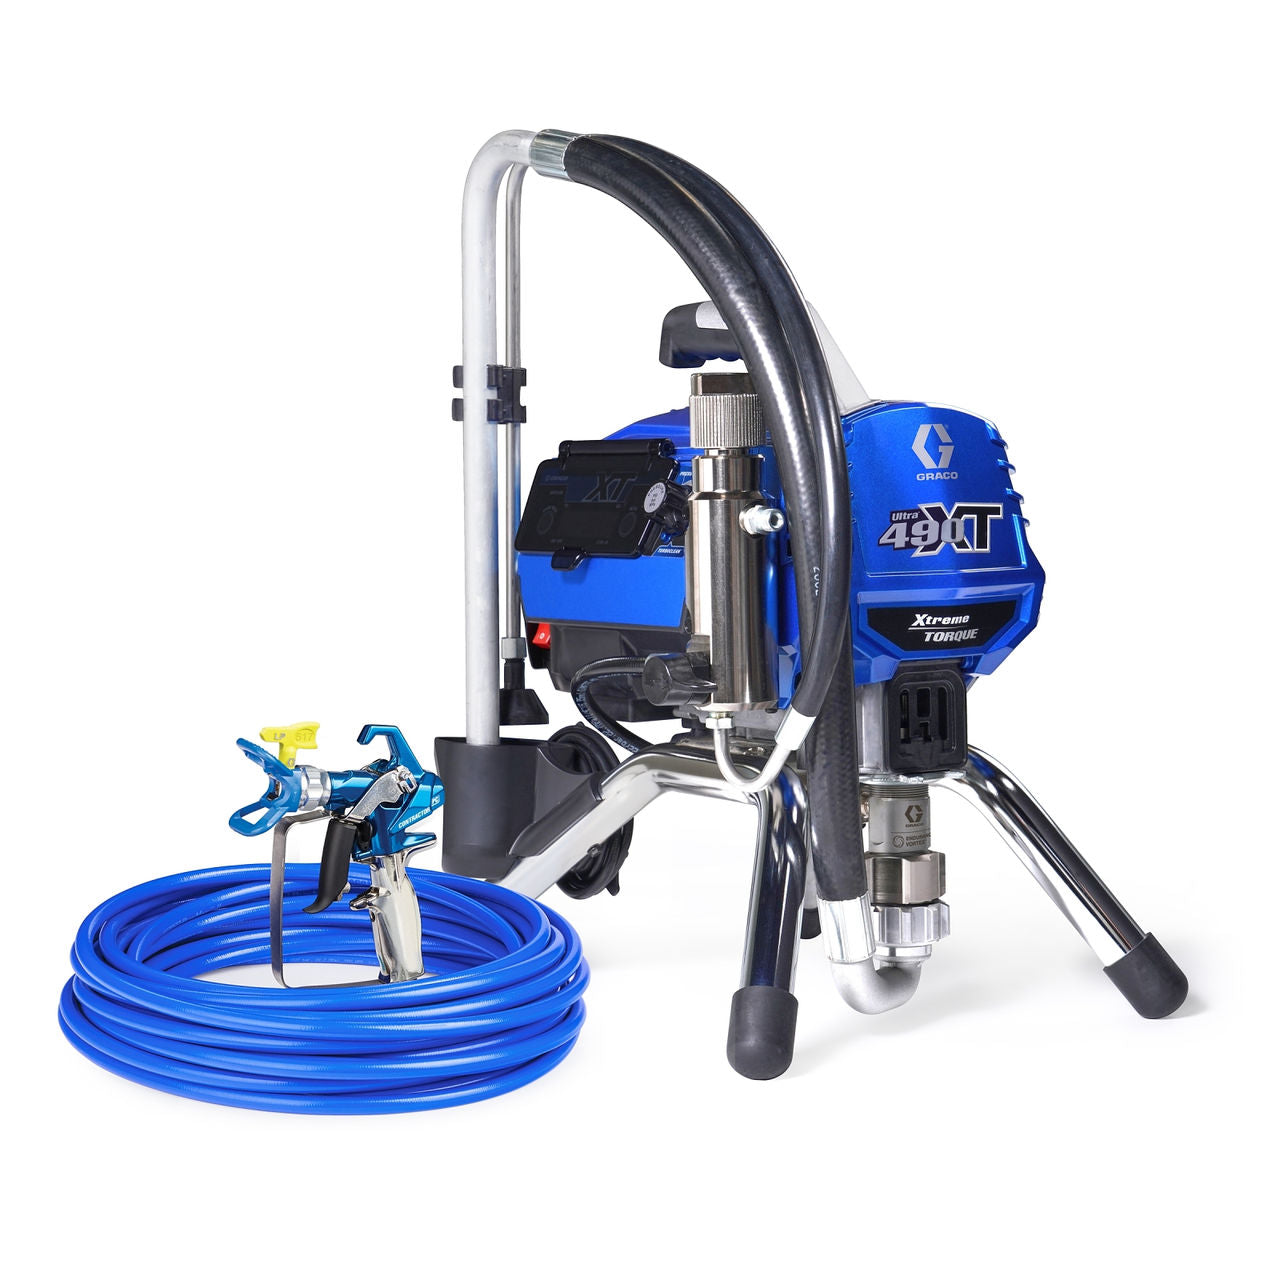 Graco Ultra 490 XT Stand Electric Airless Paint Sprayer, Front Right - The Paint People